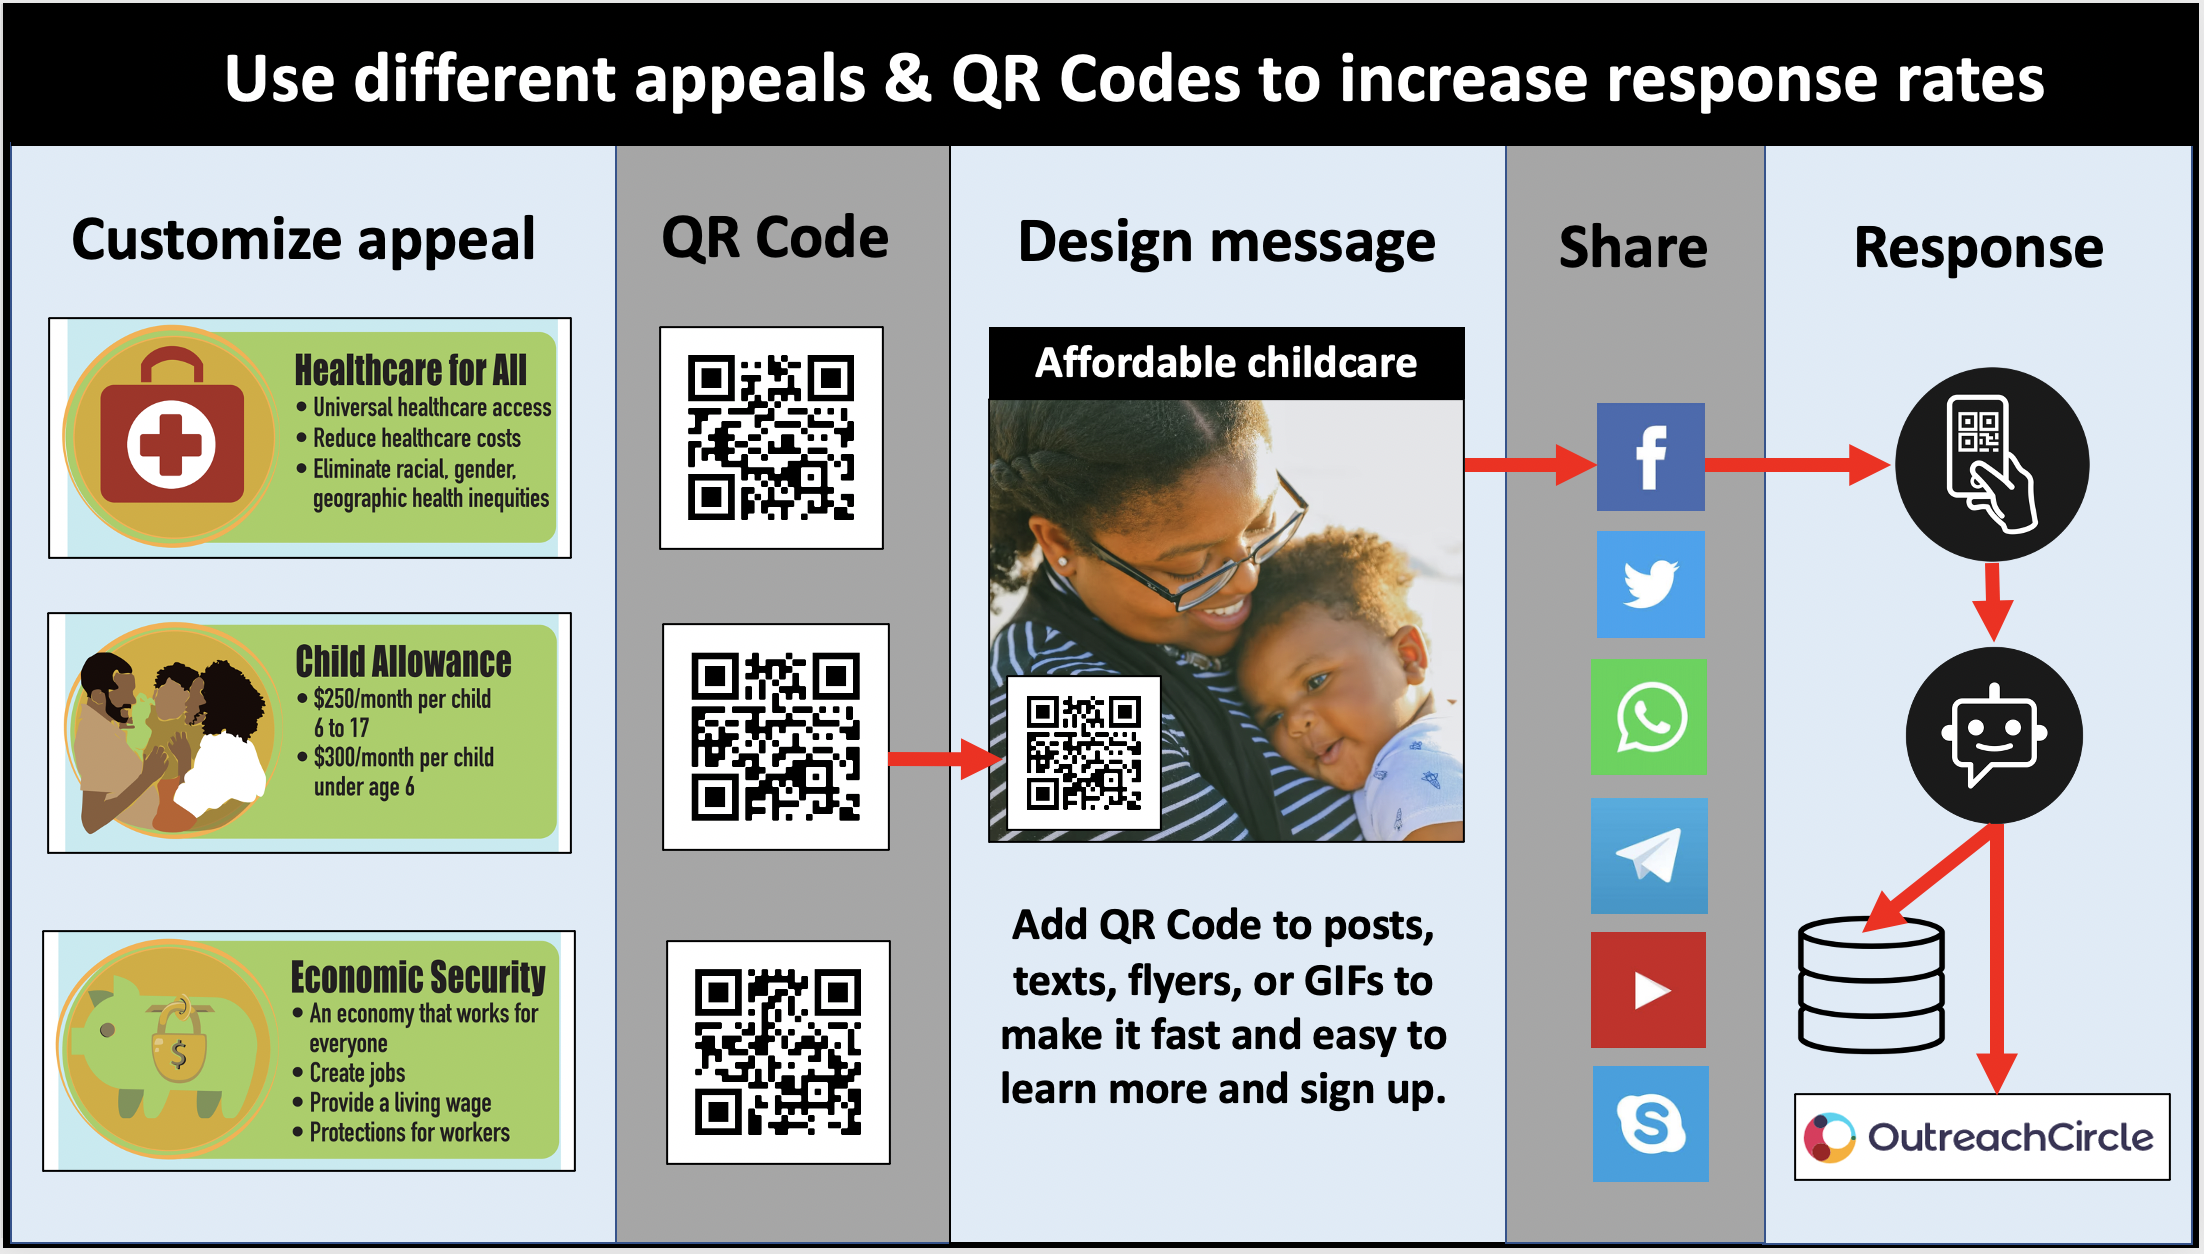 Improve response rates and signups with customized appeals, QR Codes and chatbots to improve response rates and signups.